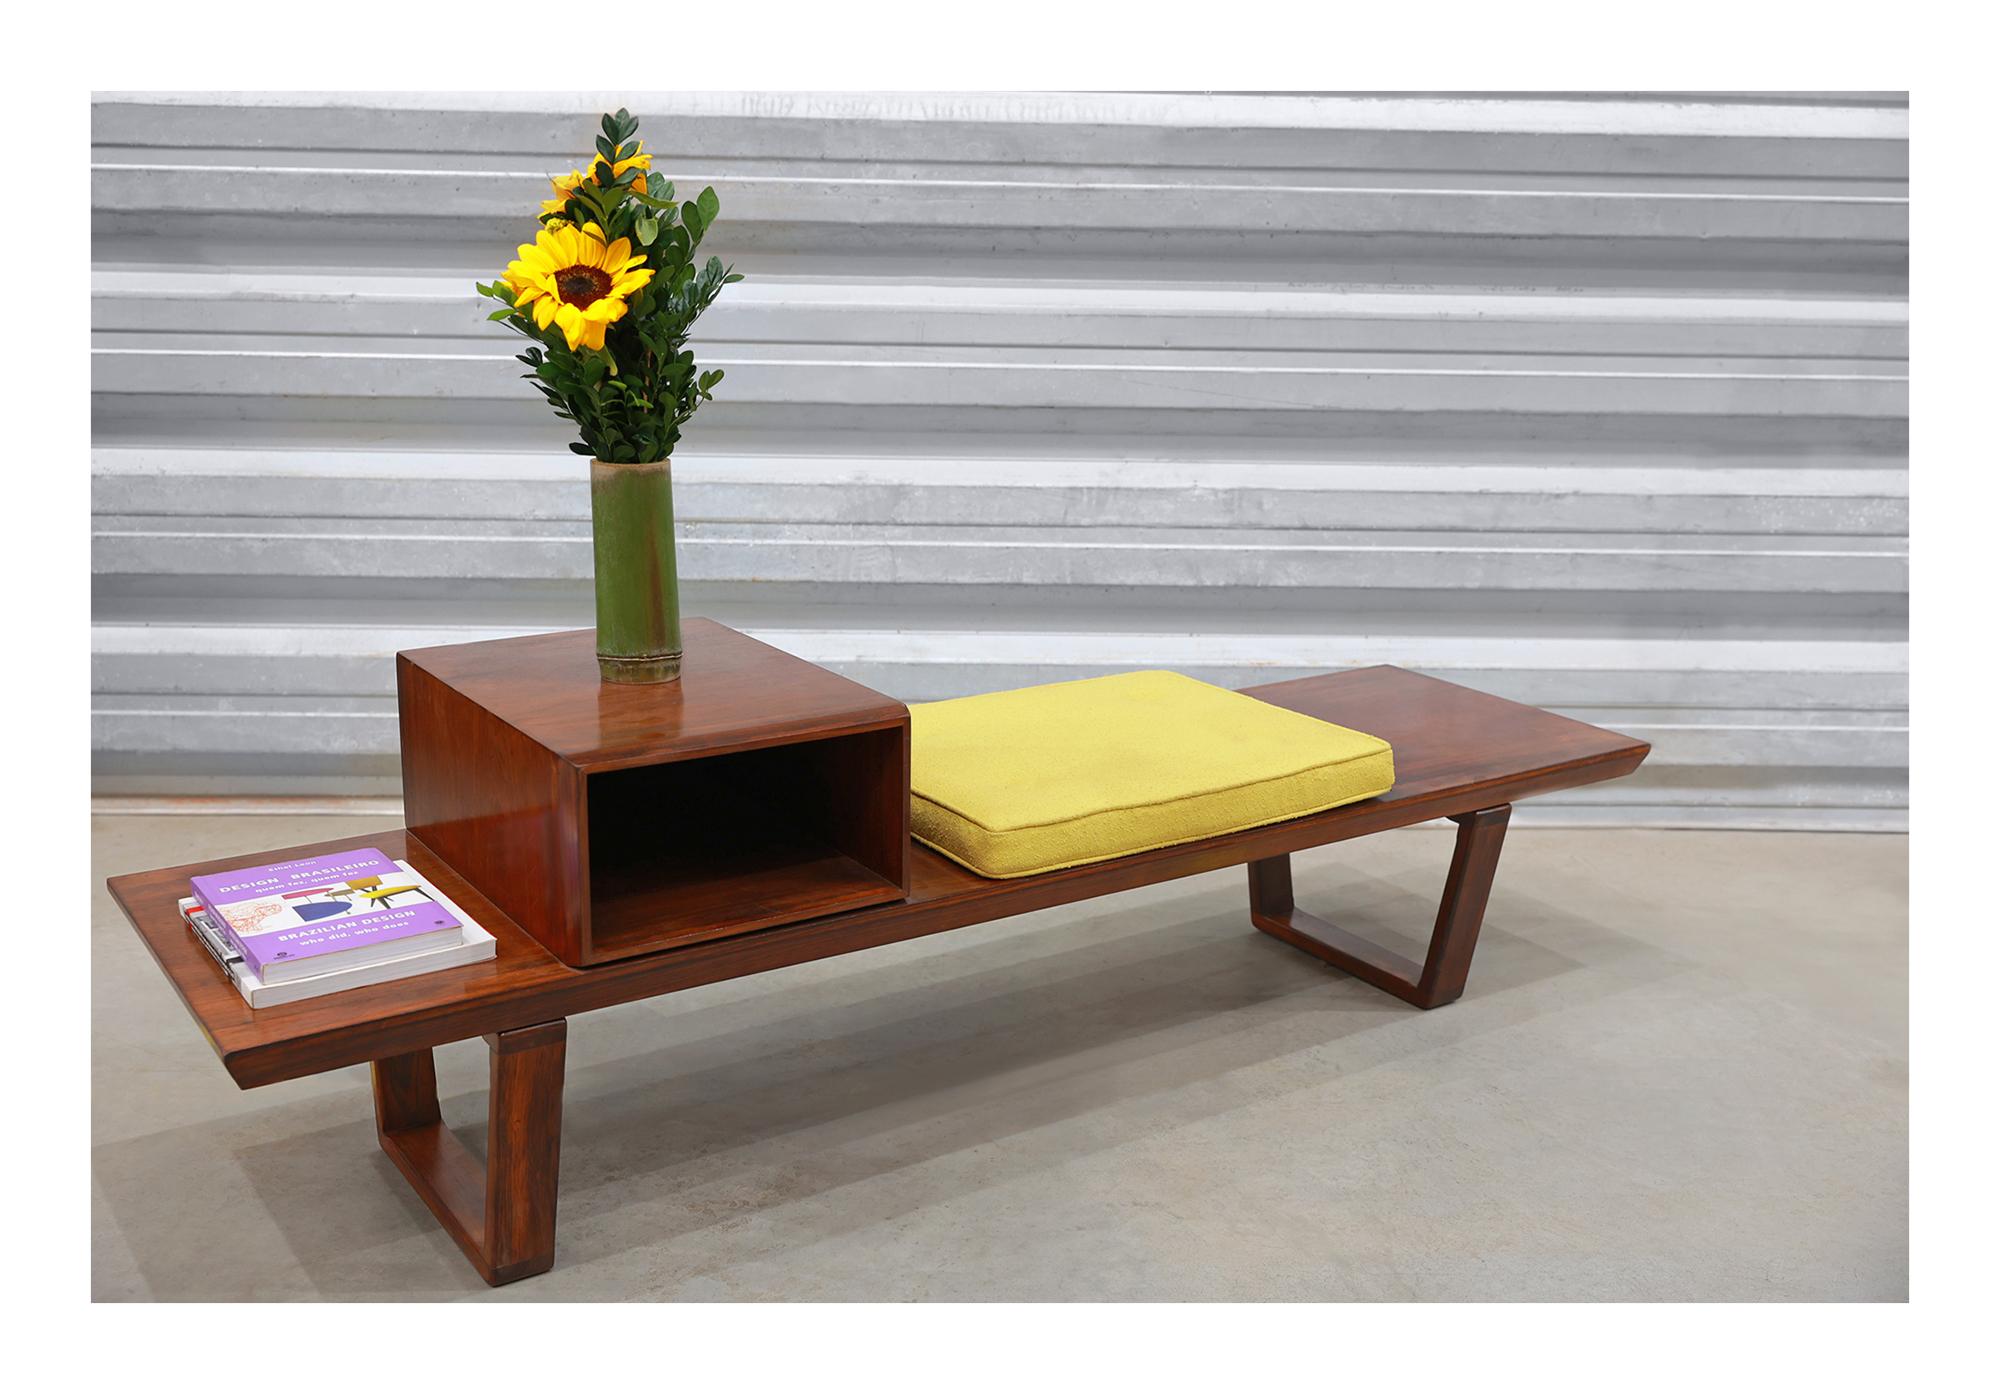 The bench features two legs, a module for storage and one seat with a reupholstered yellow fabric. The piece is made with Brazilian hardwood and it has a beautiful color and pattern to it. The wood has also been refinished and is in excellent